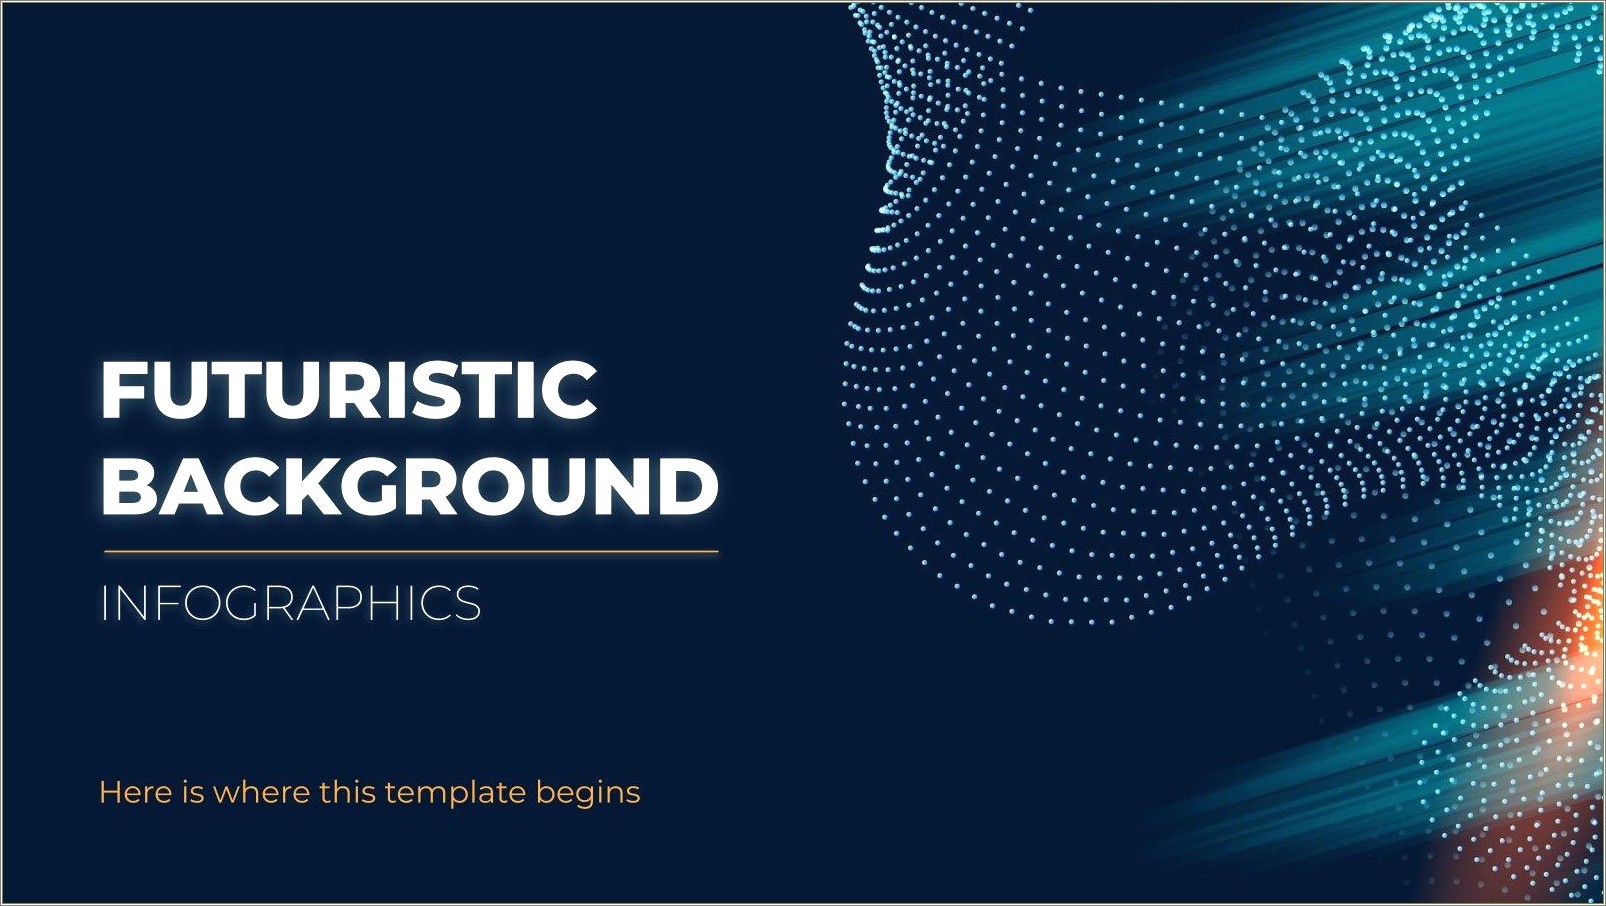 Free Power Point Slide Templates Future Current